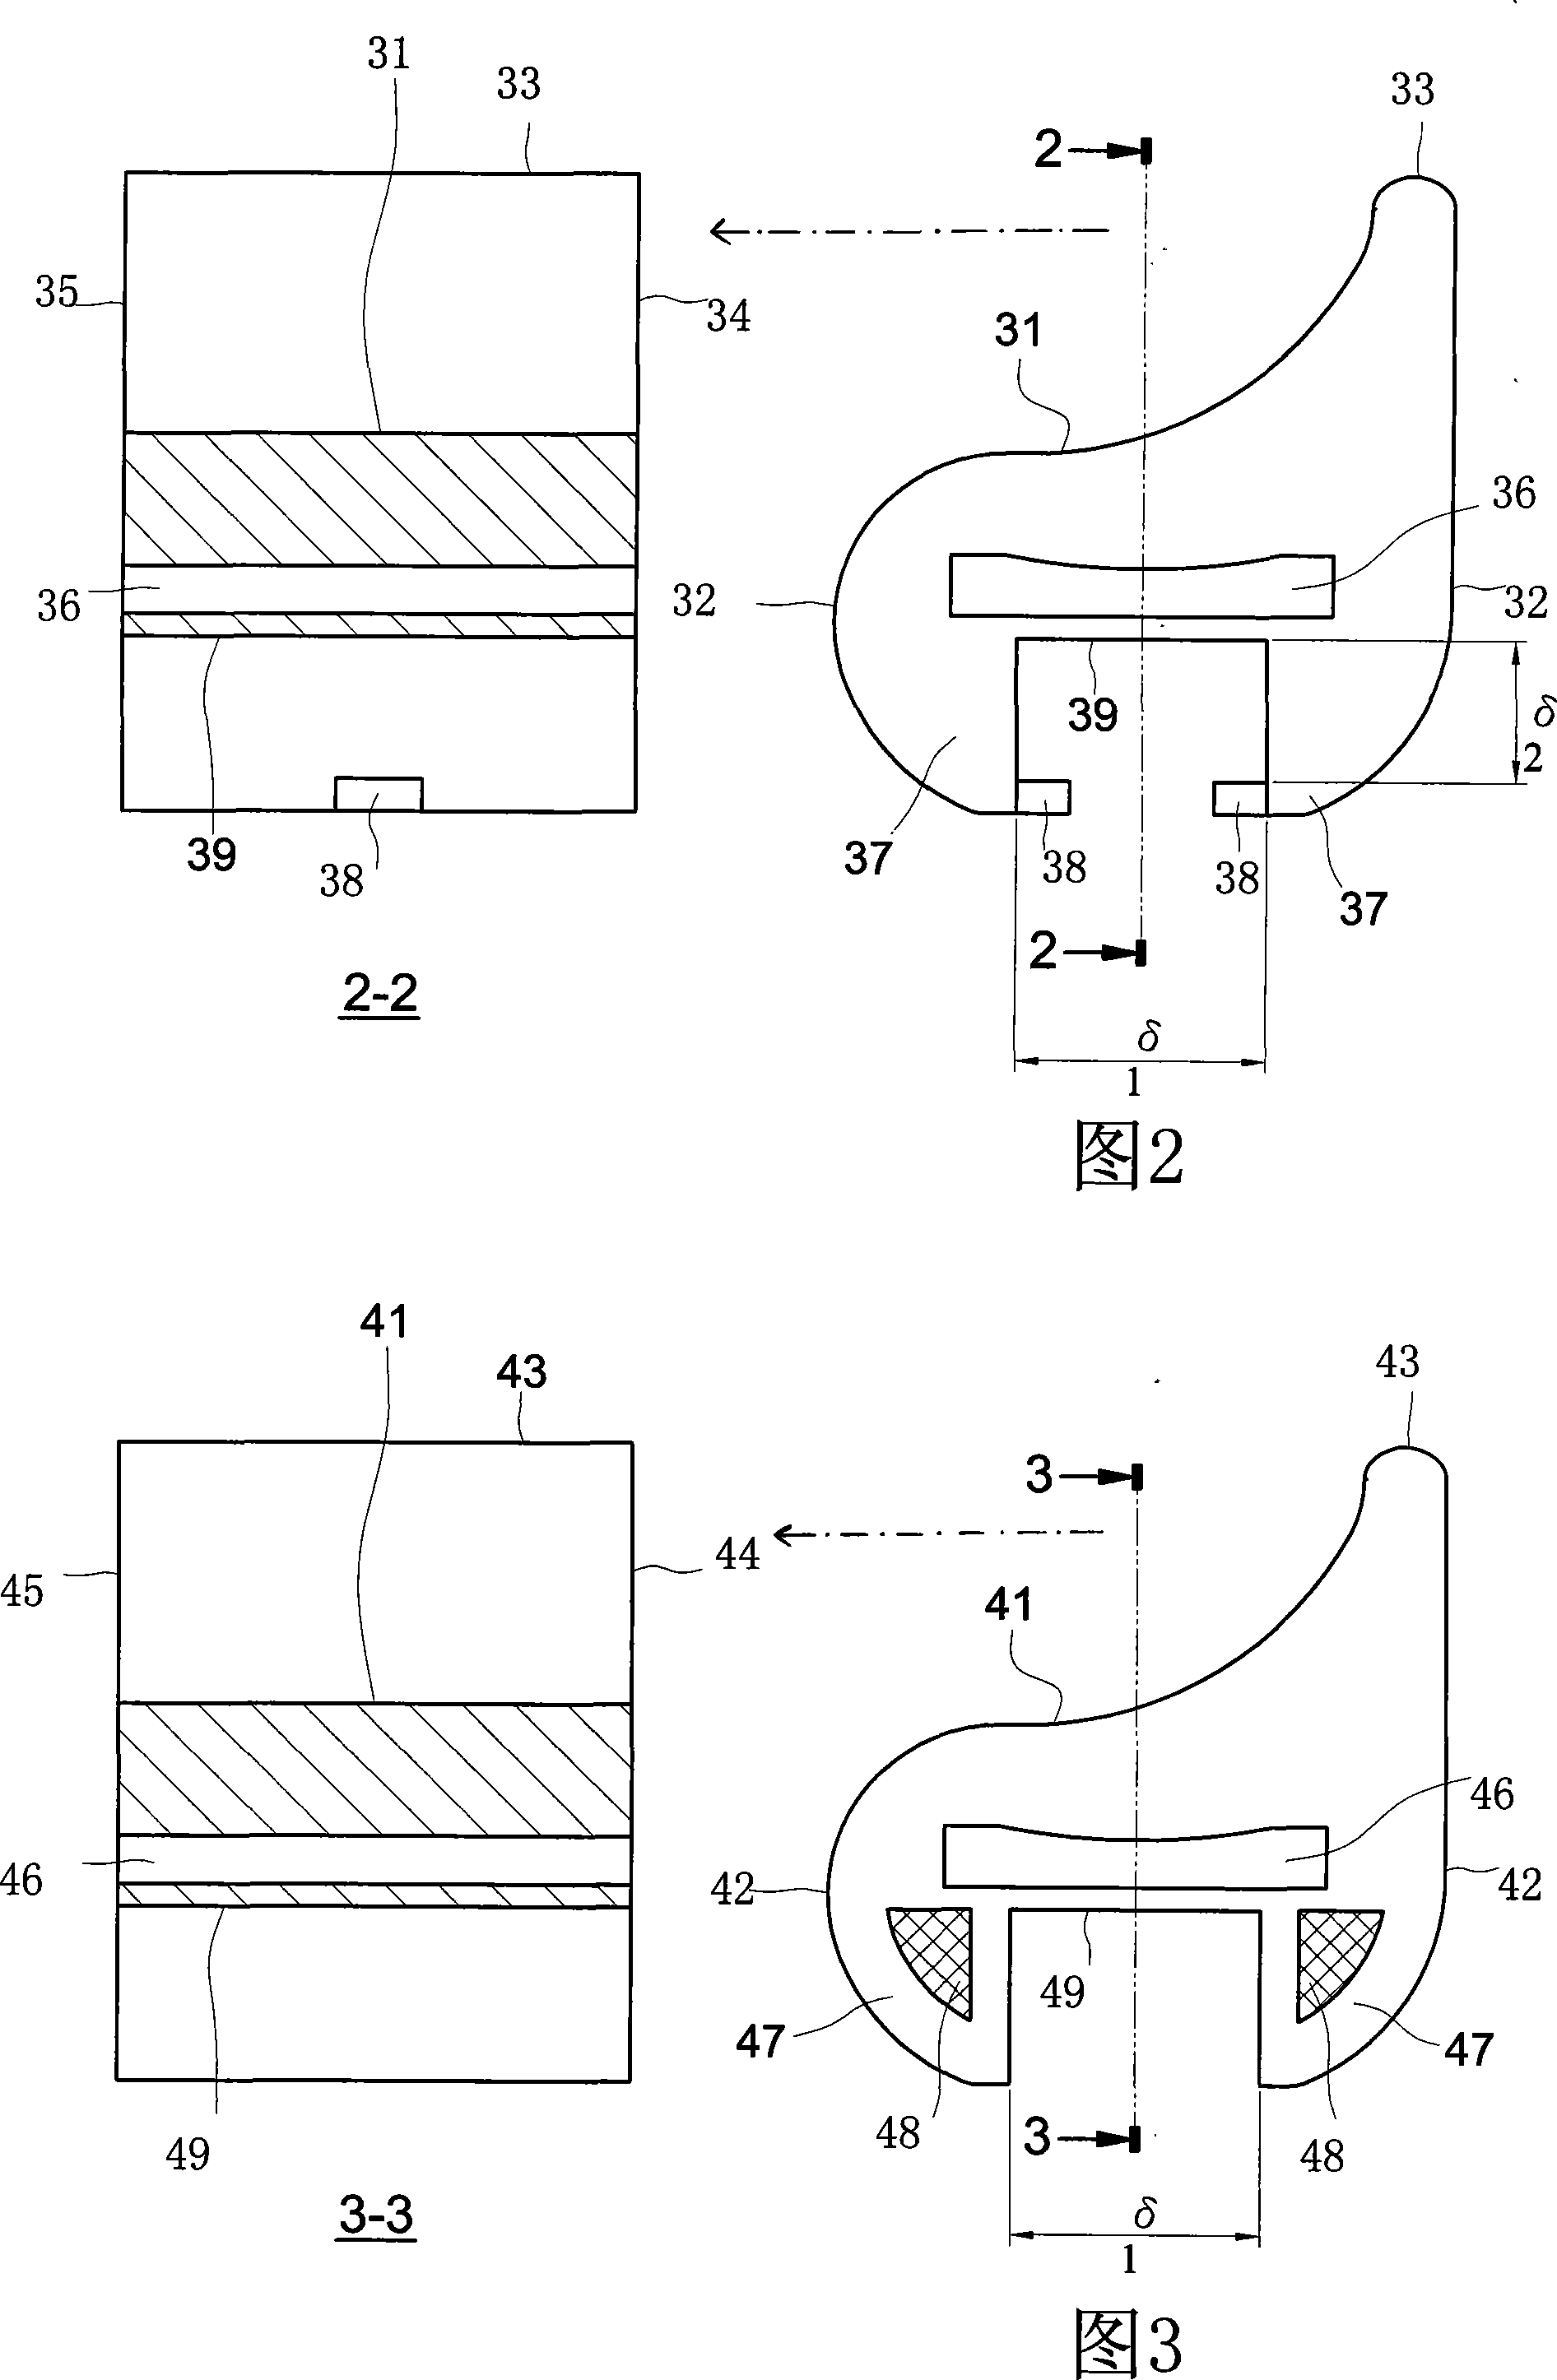 Structure of permutation and combination type windshield wiper